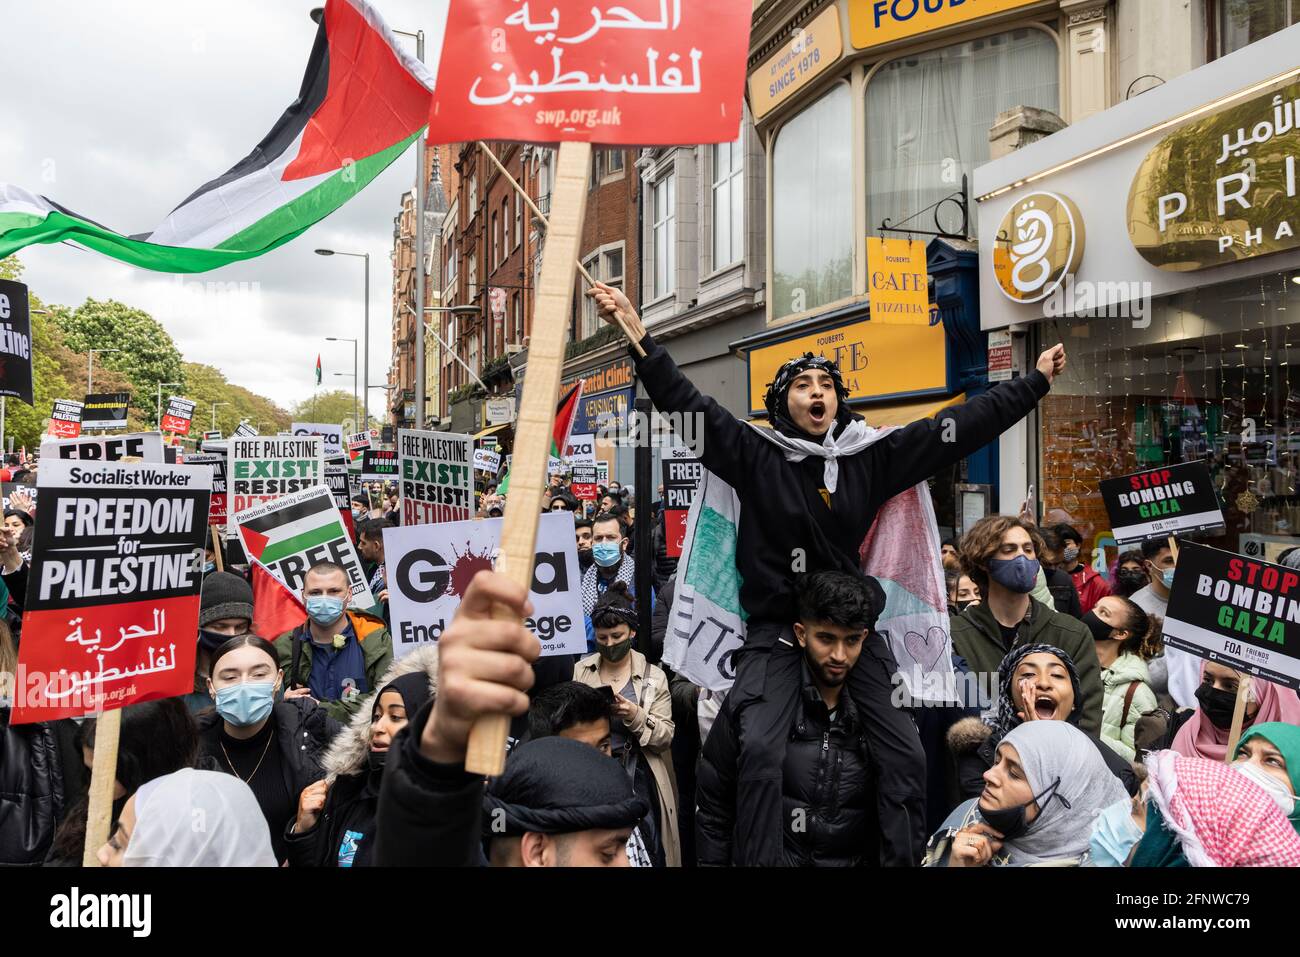 A protester with arms outstretched shouting, 'Free Palestine' solidarity protest, London, 15 May 2021 Stock Photo